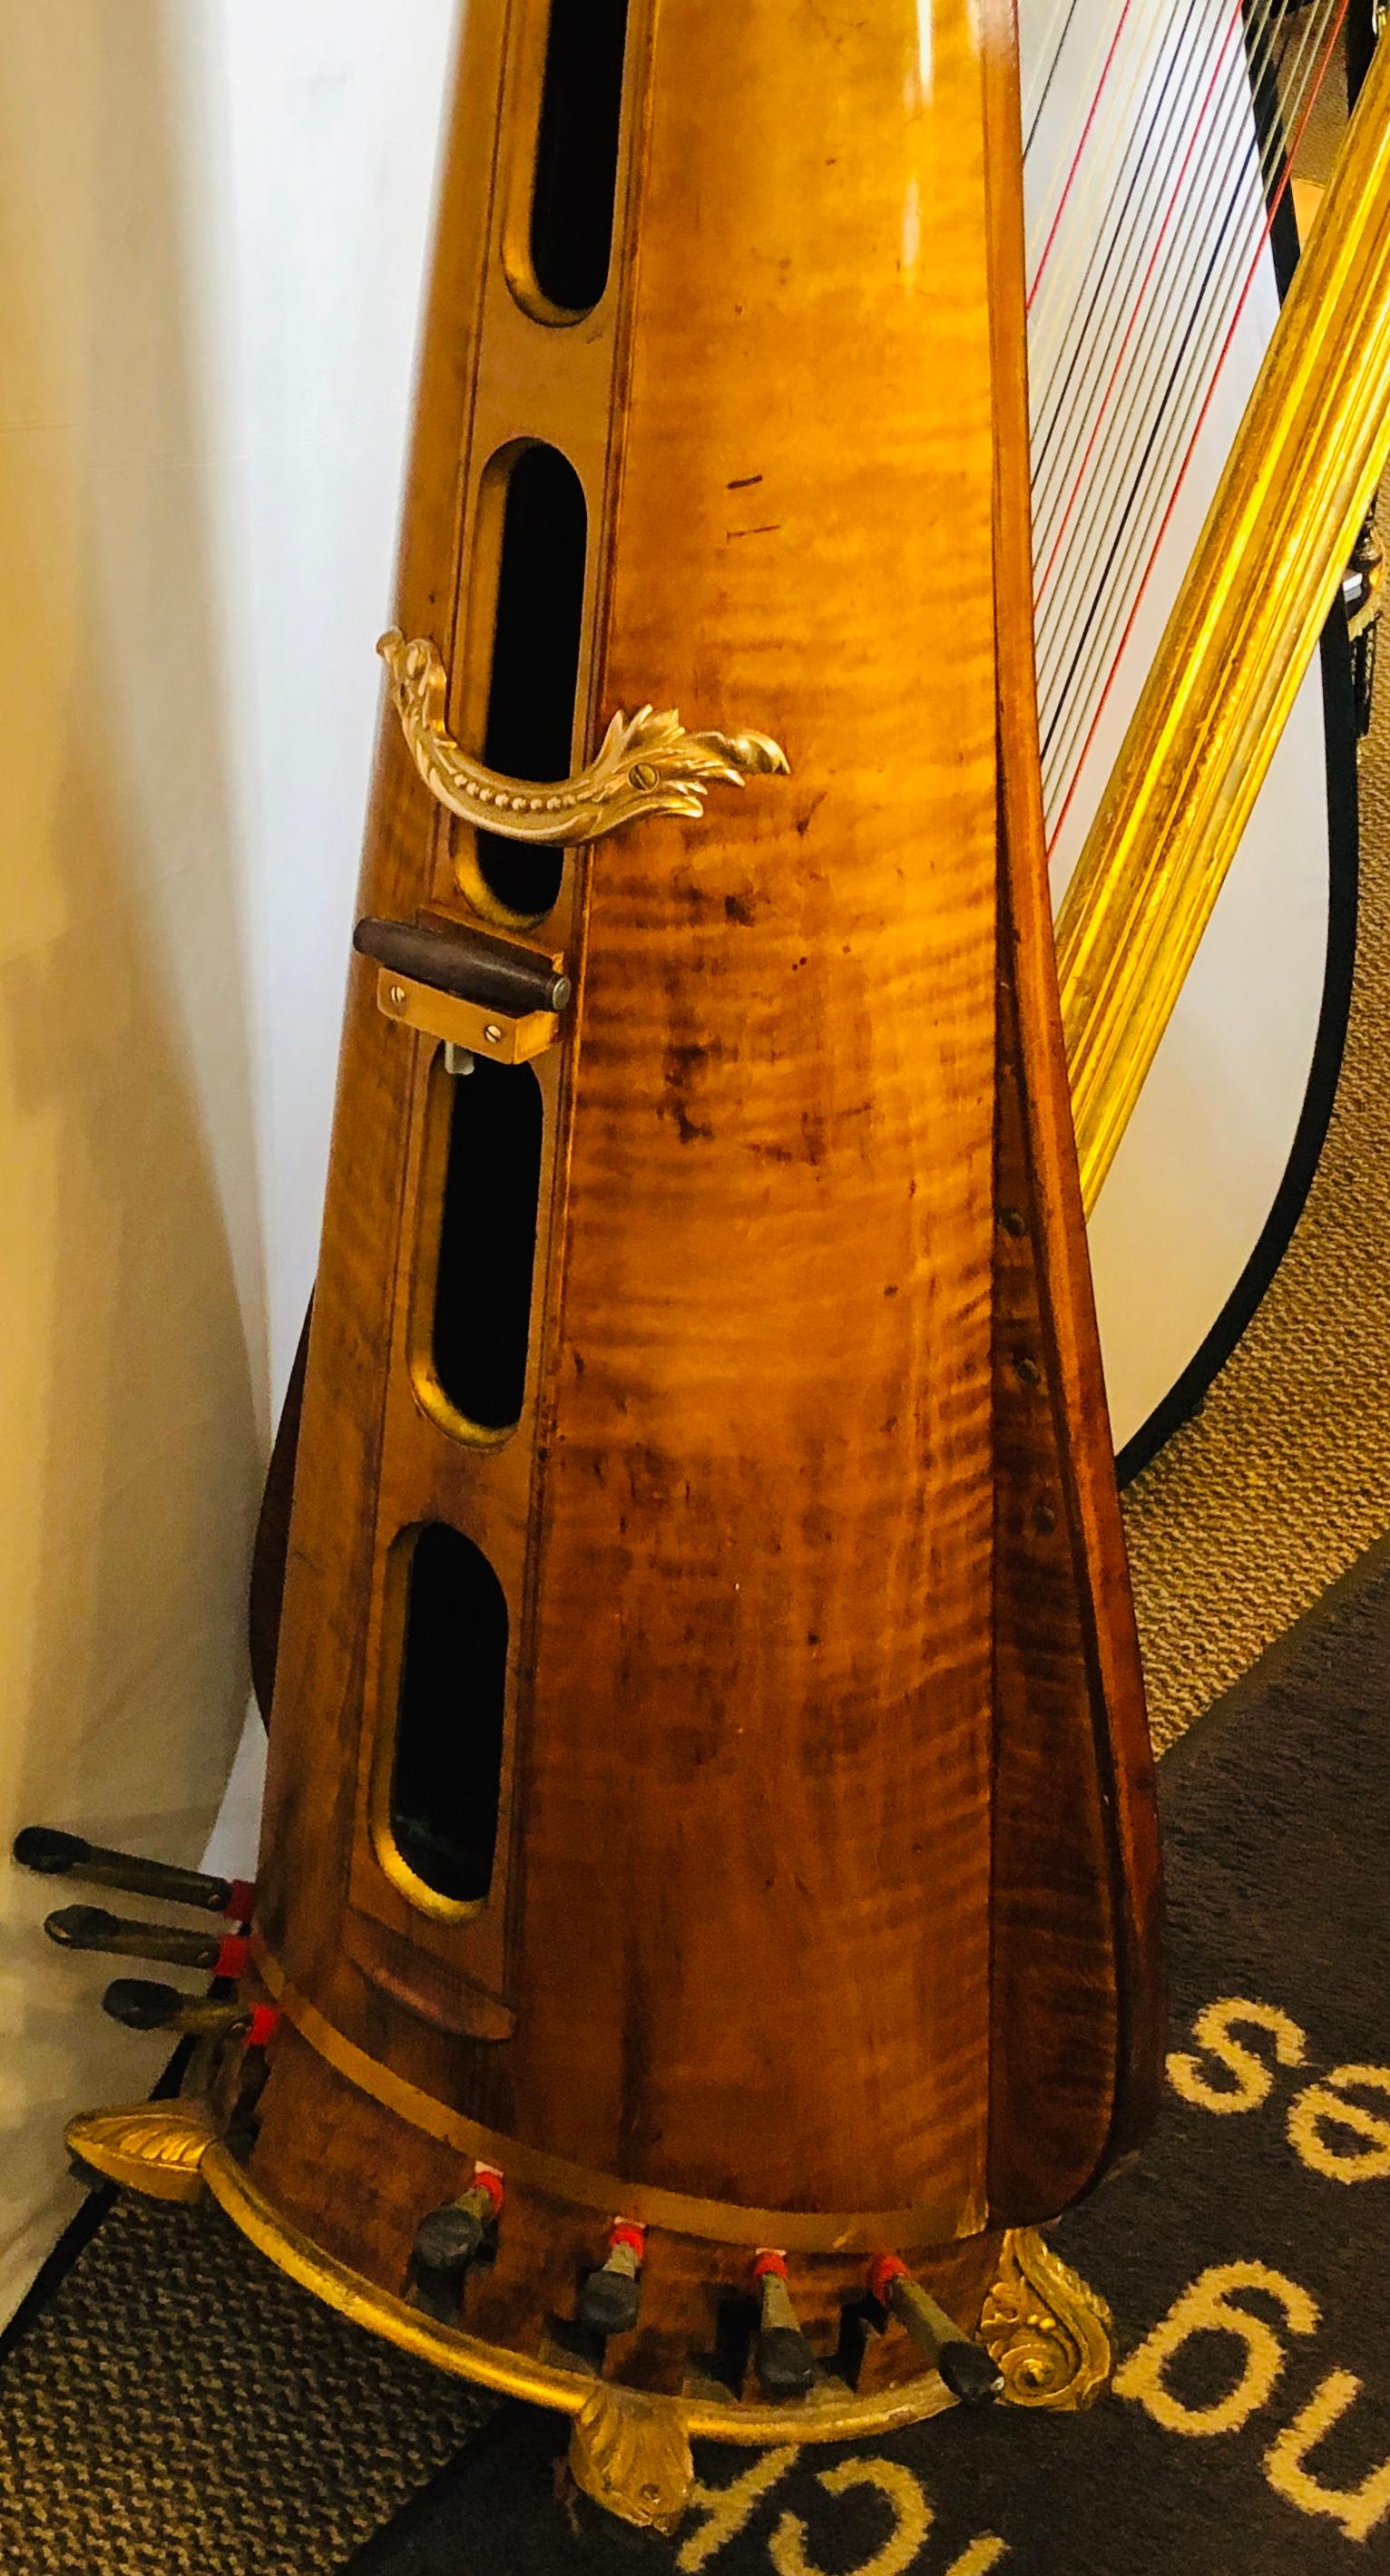 1915 Premium Style 23 Gold Lyon and Healy Concert Grand Harp 4